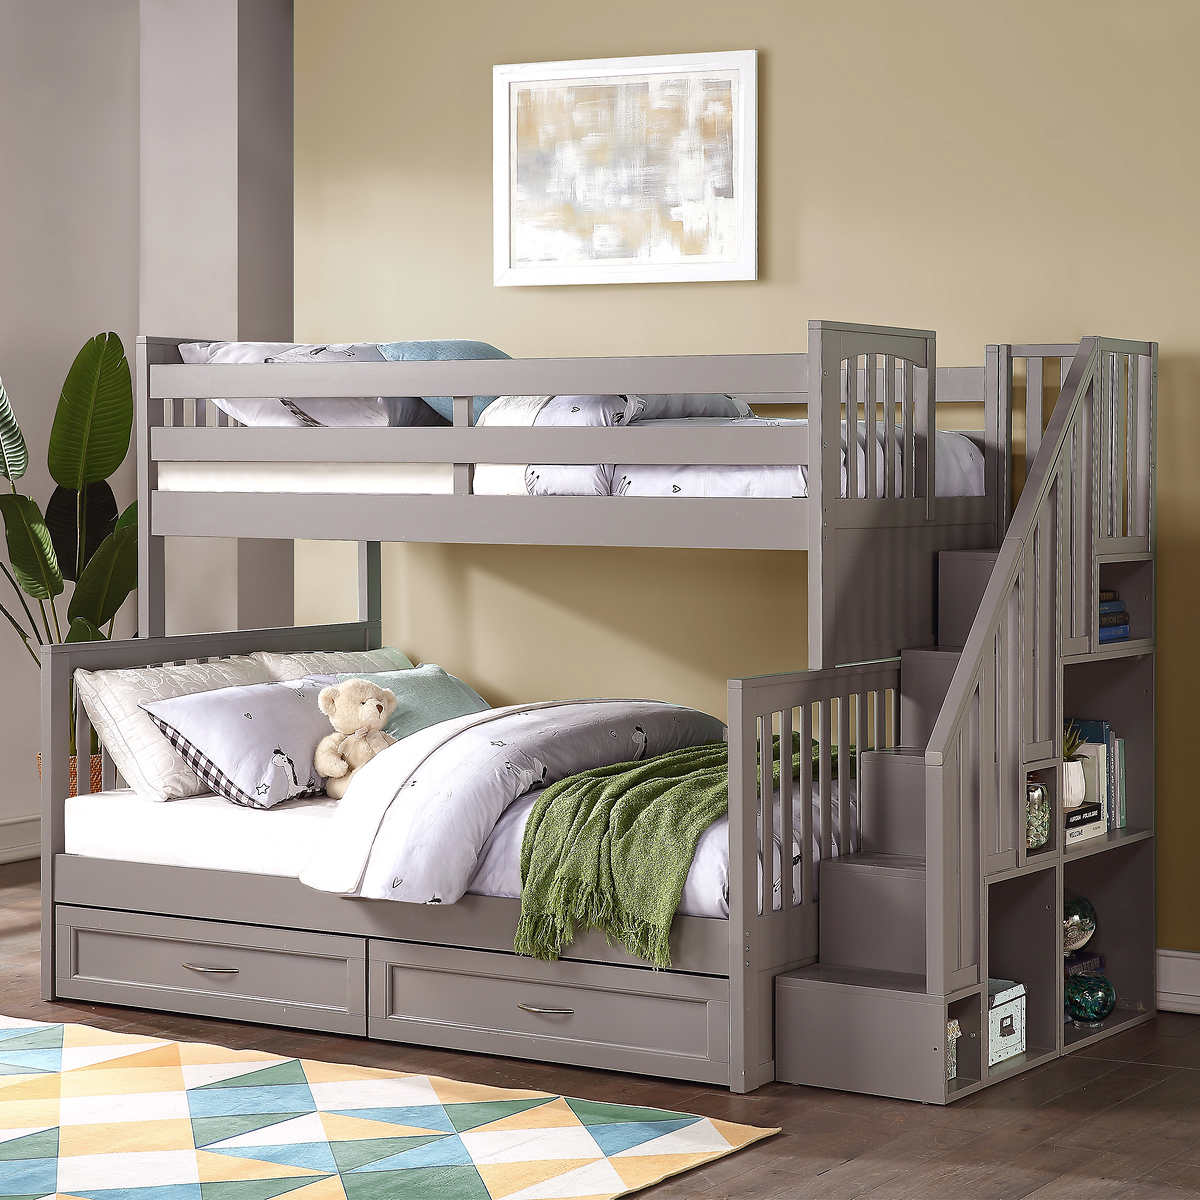 Vandalay Twin Over Double Bunk Bed With, Cool Double Bunk Beds